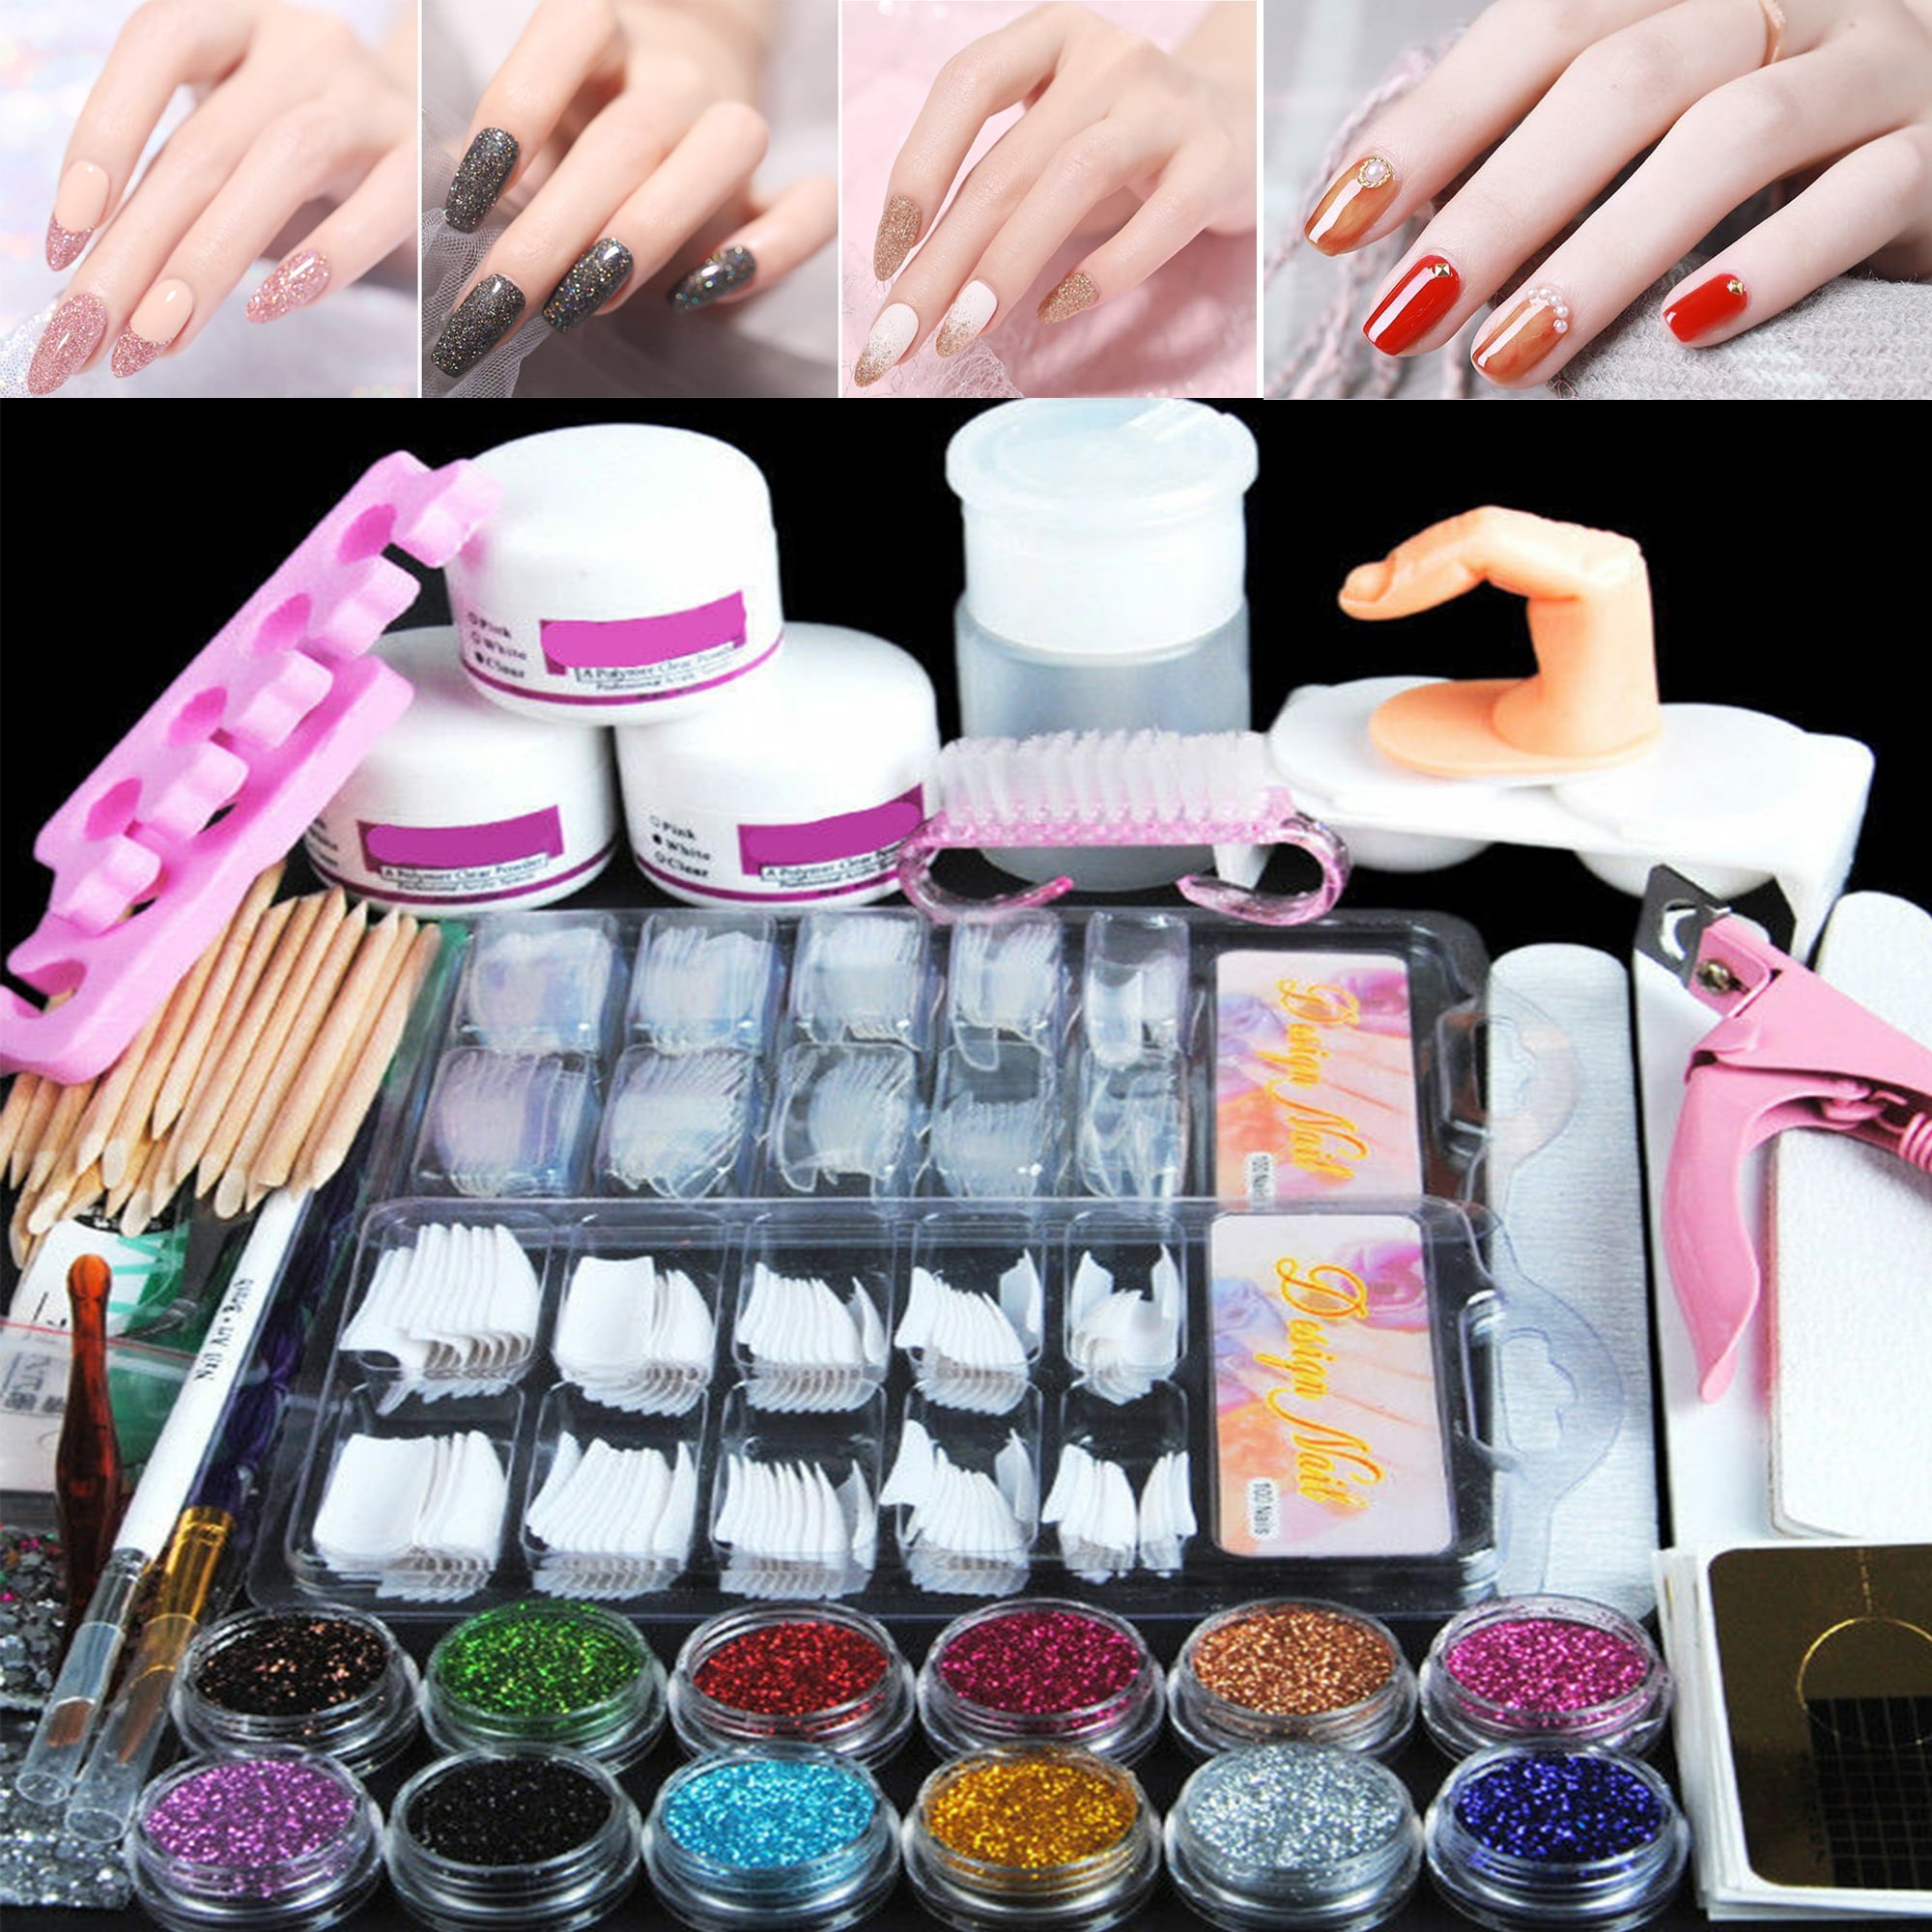 APPLICCA Full Cover Artificial Nails Set, Acrylic Nails Set, Nail Extension  + Nail Glue Transparent+White (Pack of 2)